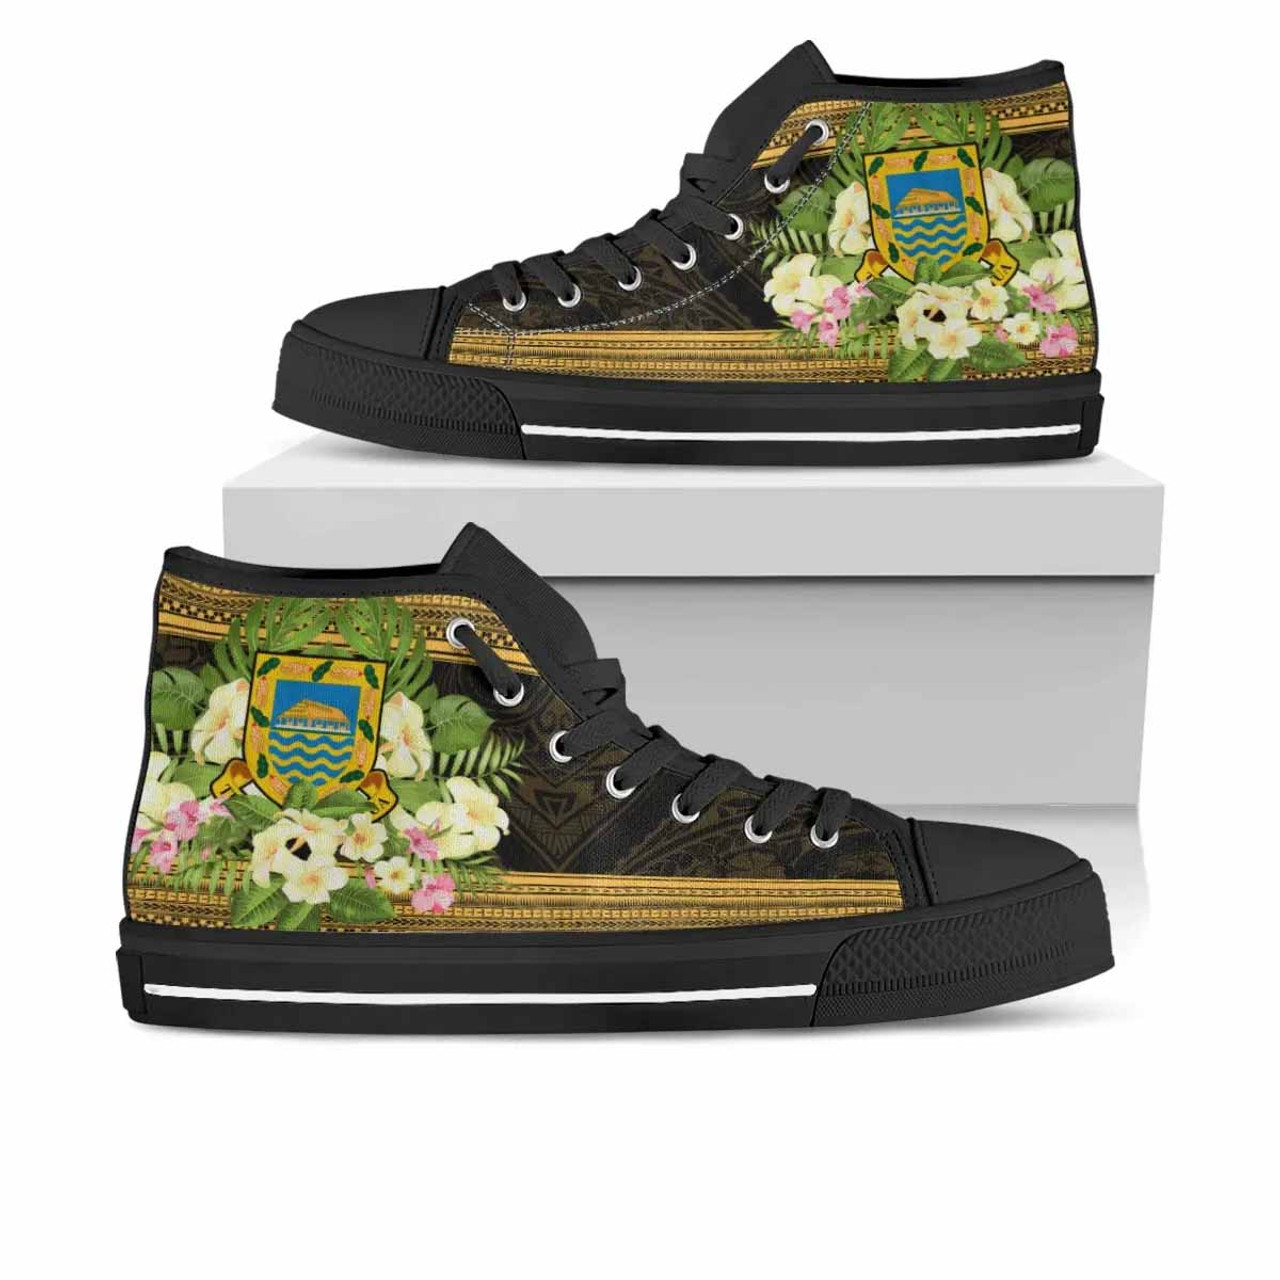 Tuvalu High Top Shoes - Polynesian Gold Patterns Collection 1